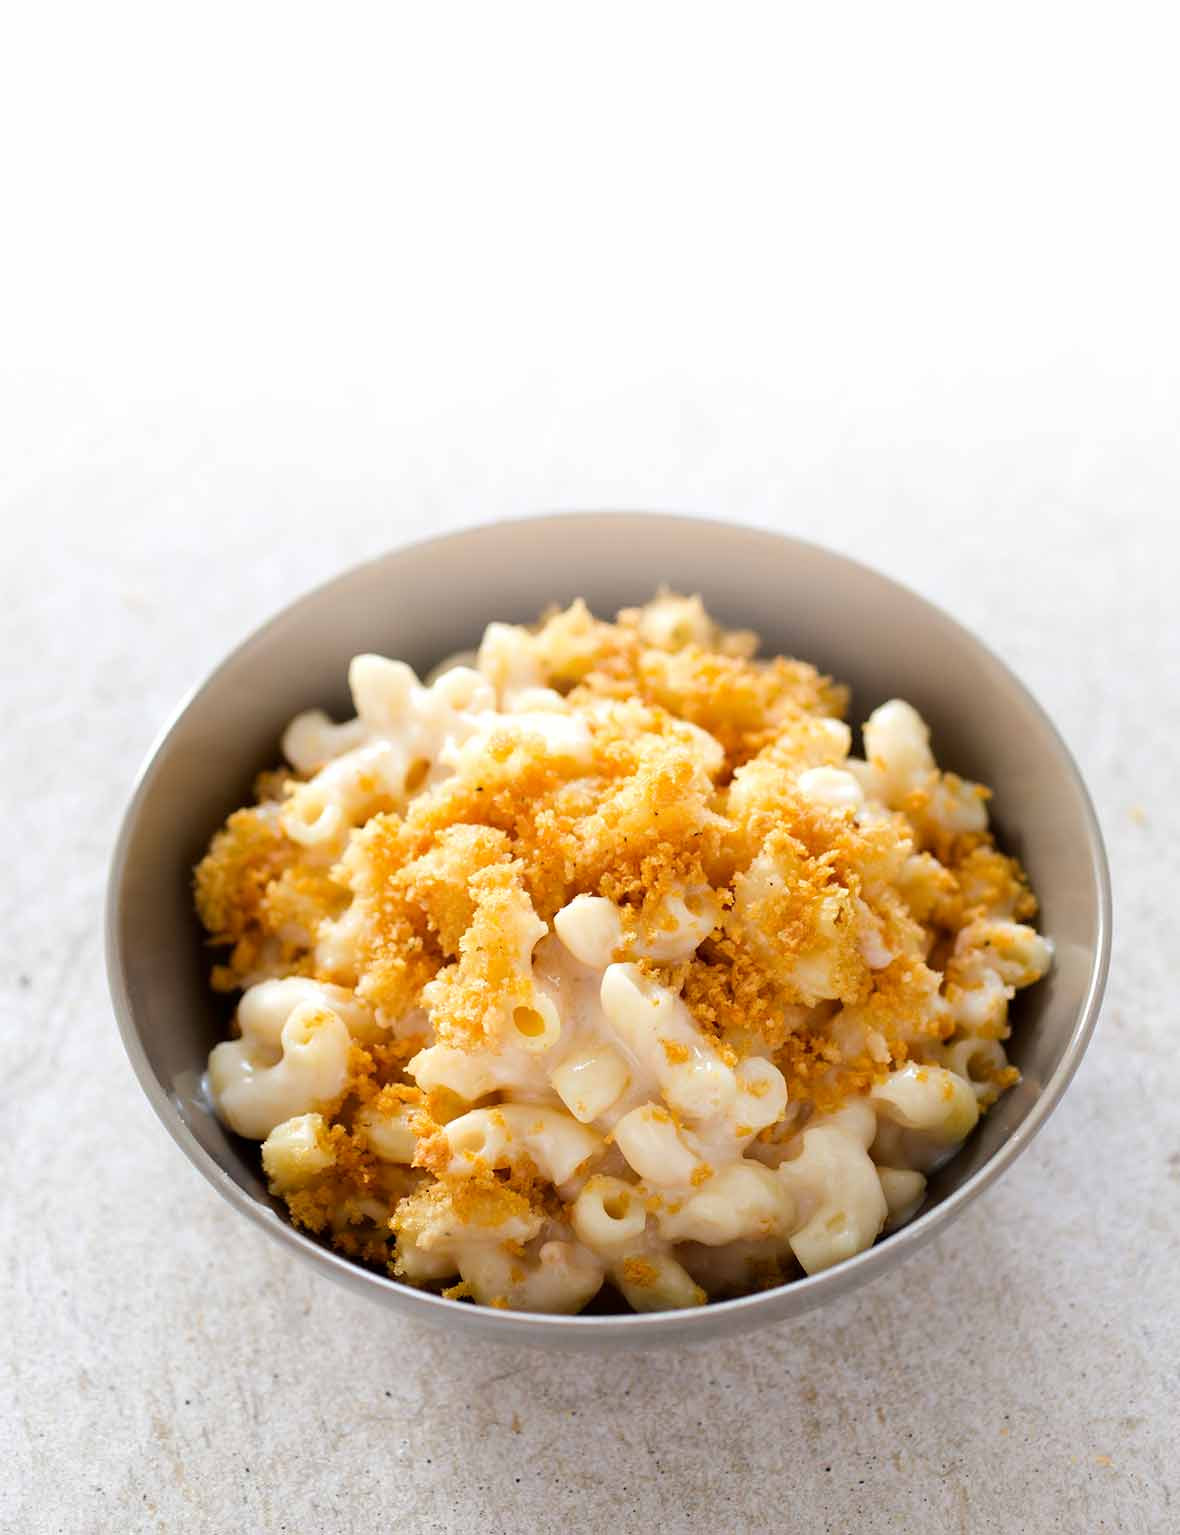 Baked Macaroni And Cheese Recipes With Bread Crumbs
 Baked Mac and Cheese with Bread Crumbs Recipe